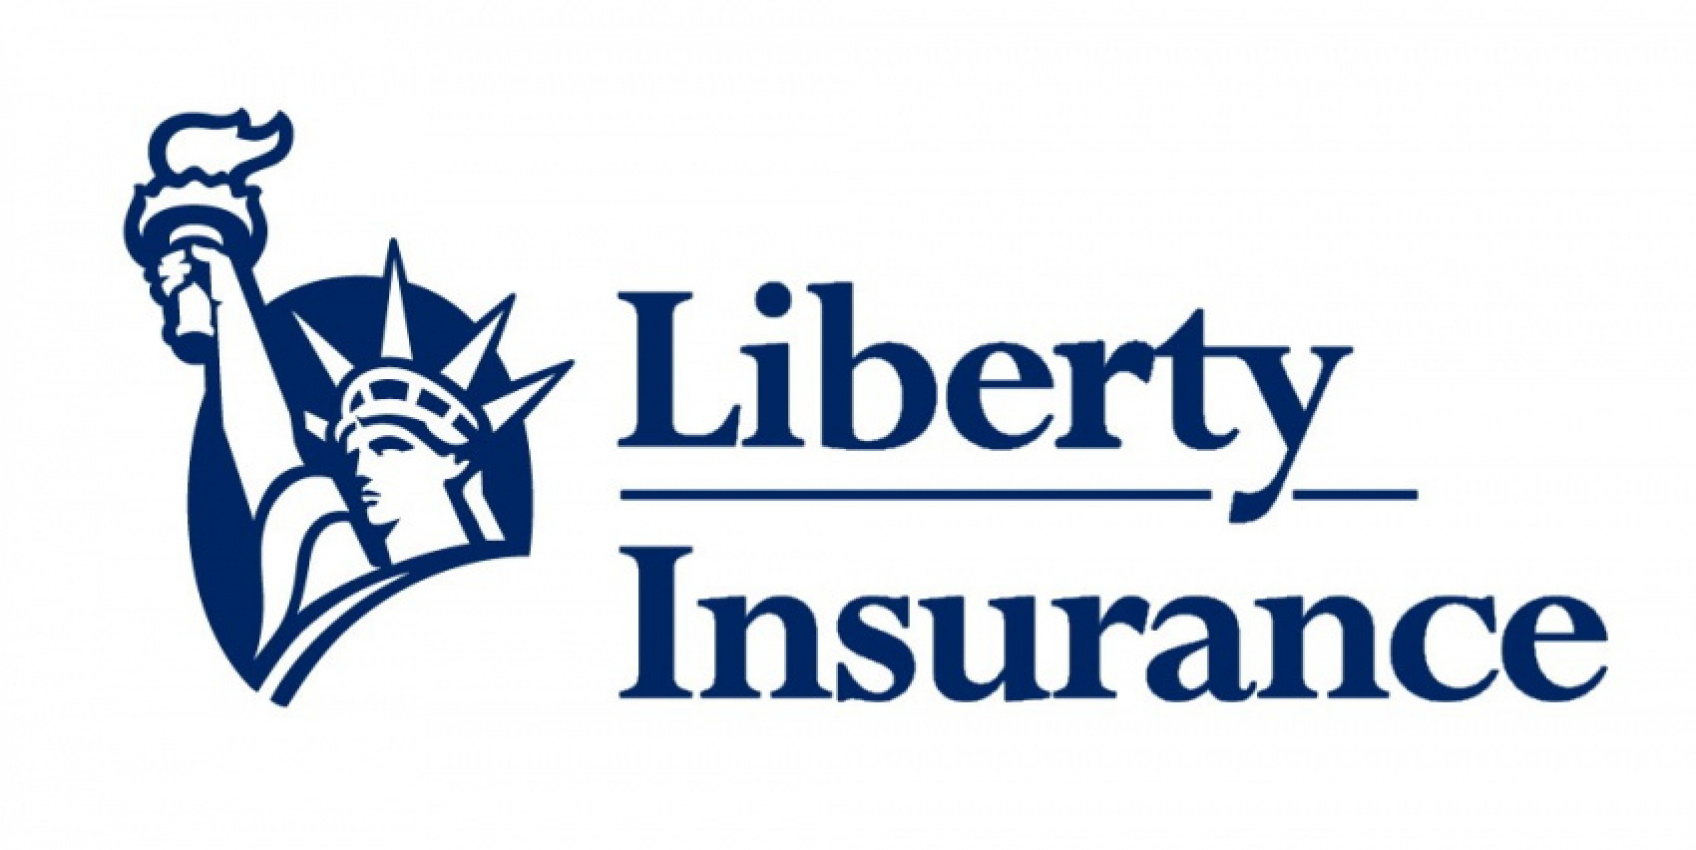 autos, cars, featured, mg, ambank group, amgeneral insurance berhad, auto insurance, insurance, insurance australia group, liberty insurance berhad, liberty mutual, malaysia, motor insurance, liberty mutual seeks to expand in malaysia with planned acquisition of amgeneral insurance